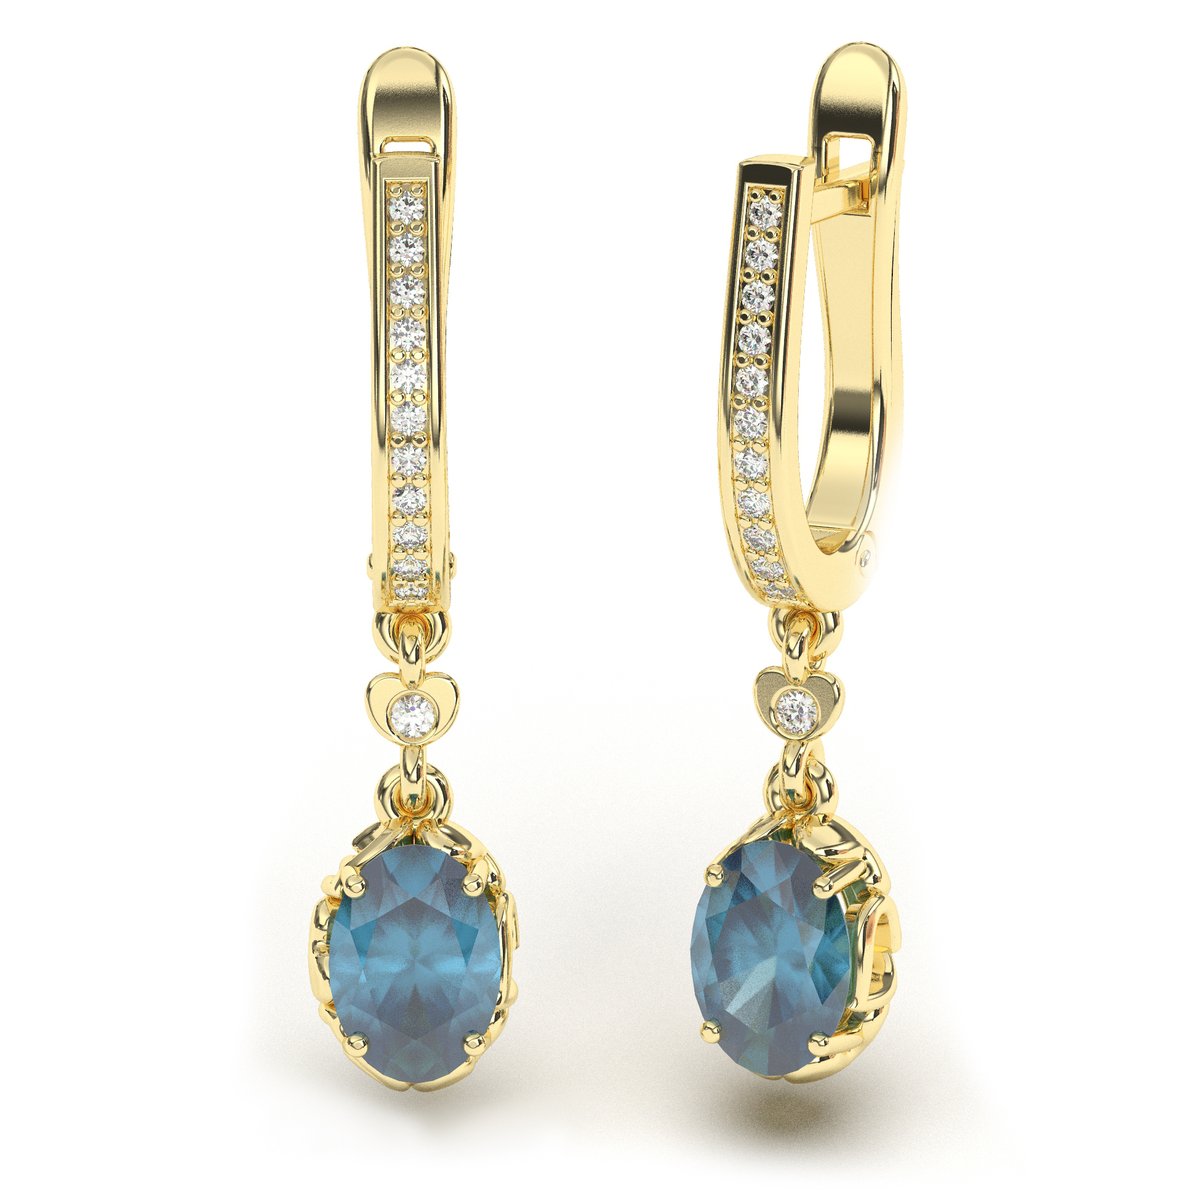 “Beauty is who you are. Jewelry is simply the icing on the cake.”
-Misty Burgess

#DivinaJewelry #TheDivinaOfficial #BlueTopaz #TopazEarrings #Fashion #JewelryOfTheDay #JewelryBlogger #MyStyle #MyLook #GoldEarrings #HauteJoaillerie #FineJewelry #HighJewelry #JewelryBrand